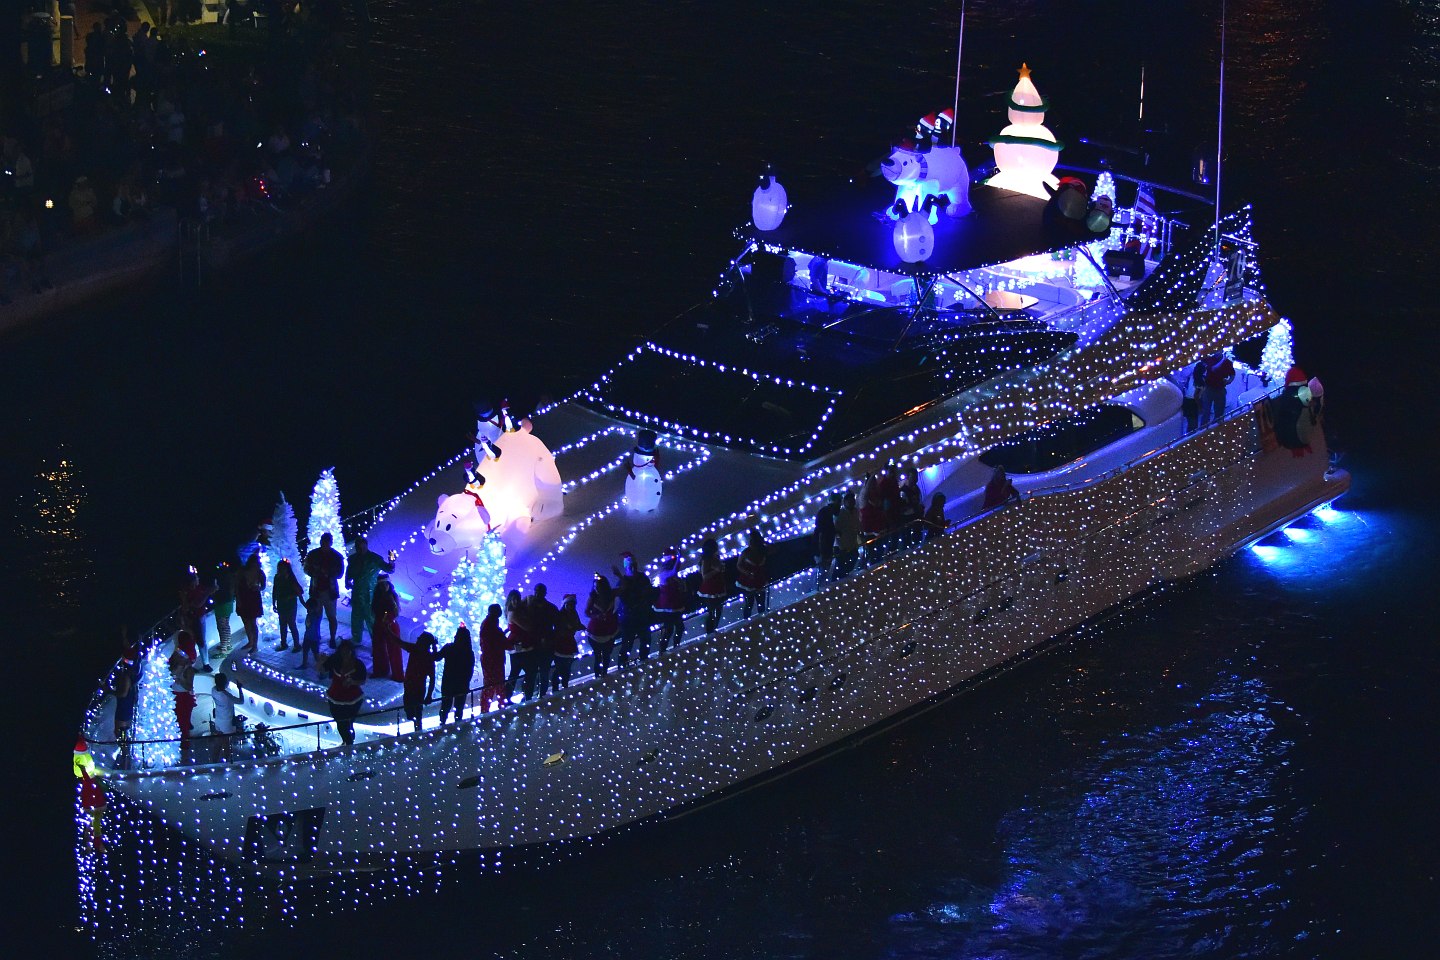 El Ladrillo III, boat number 70 in the 2021 Winterfest Boat Parade